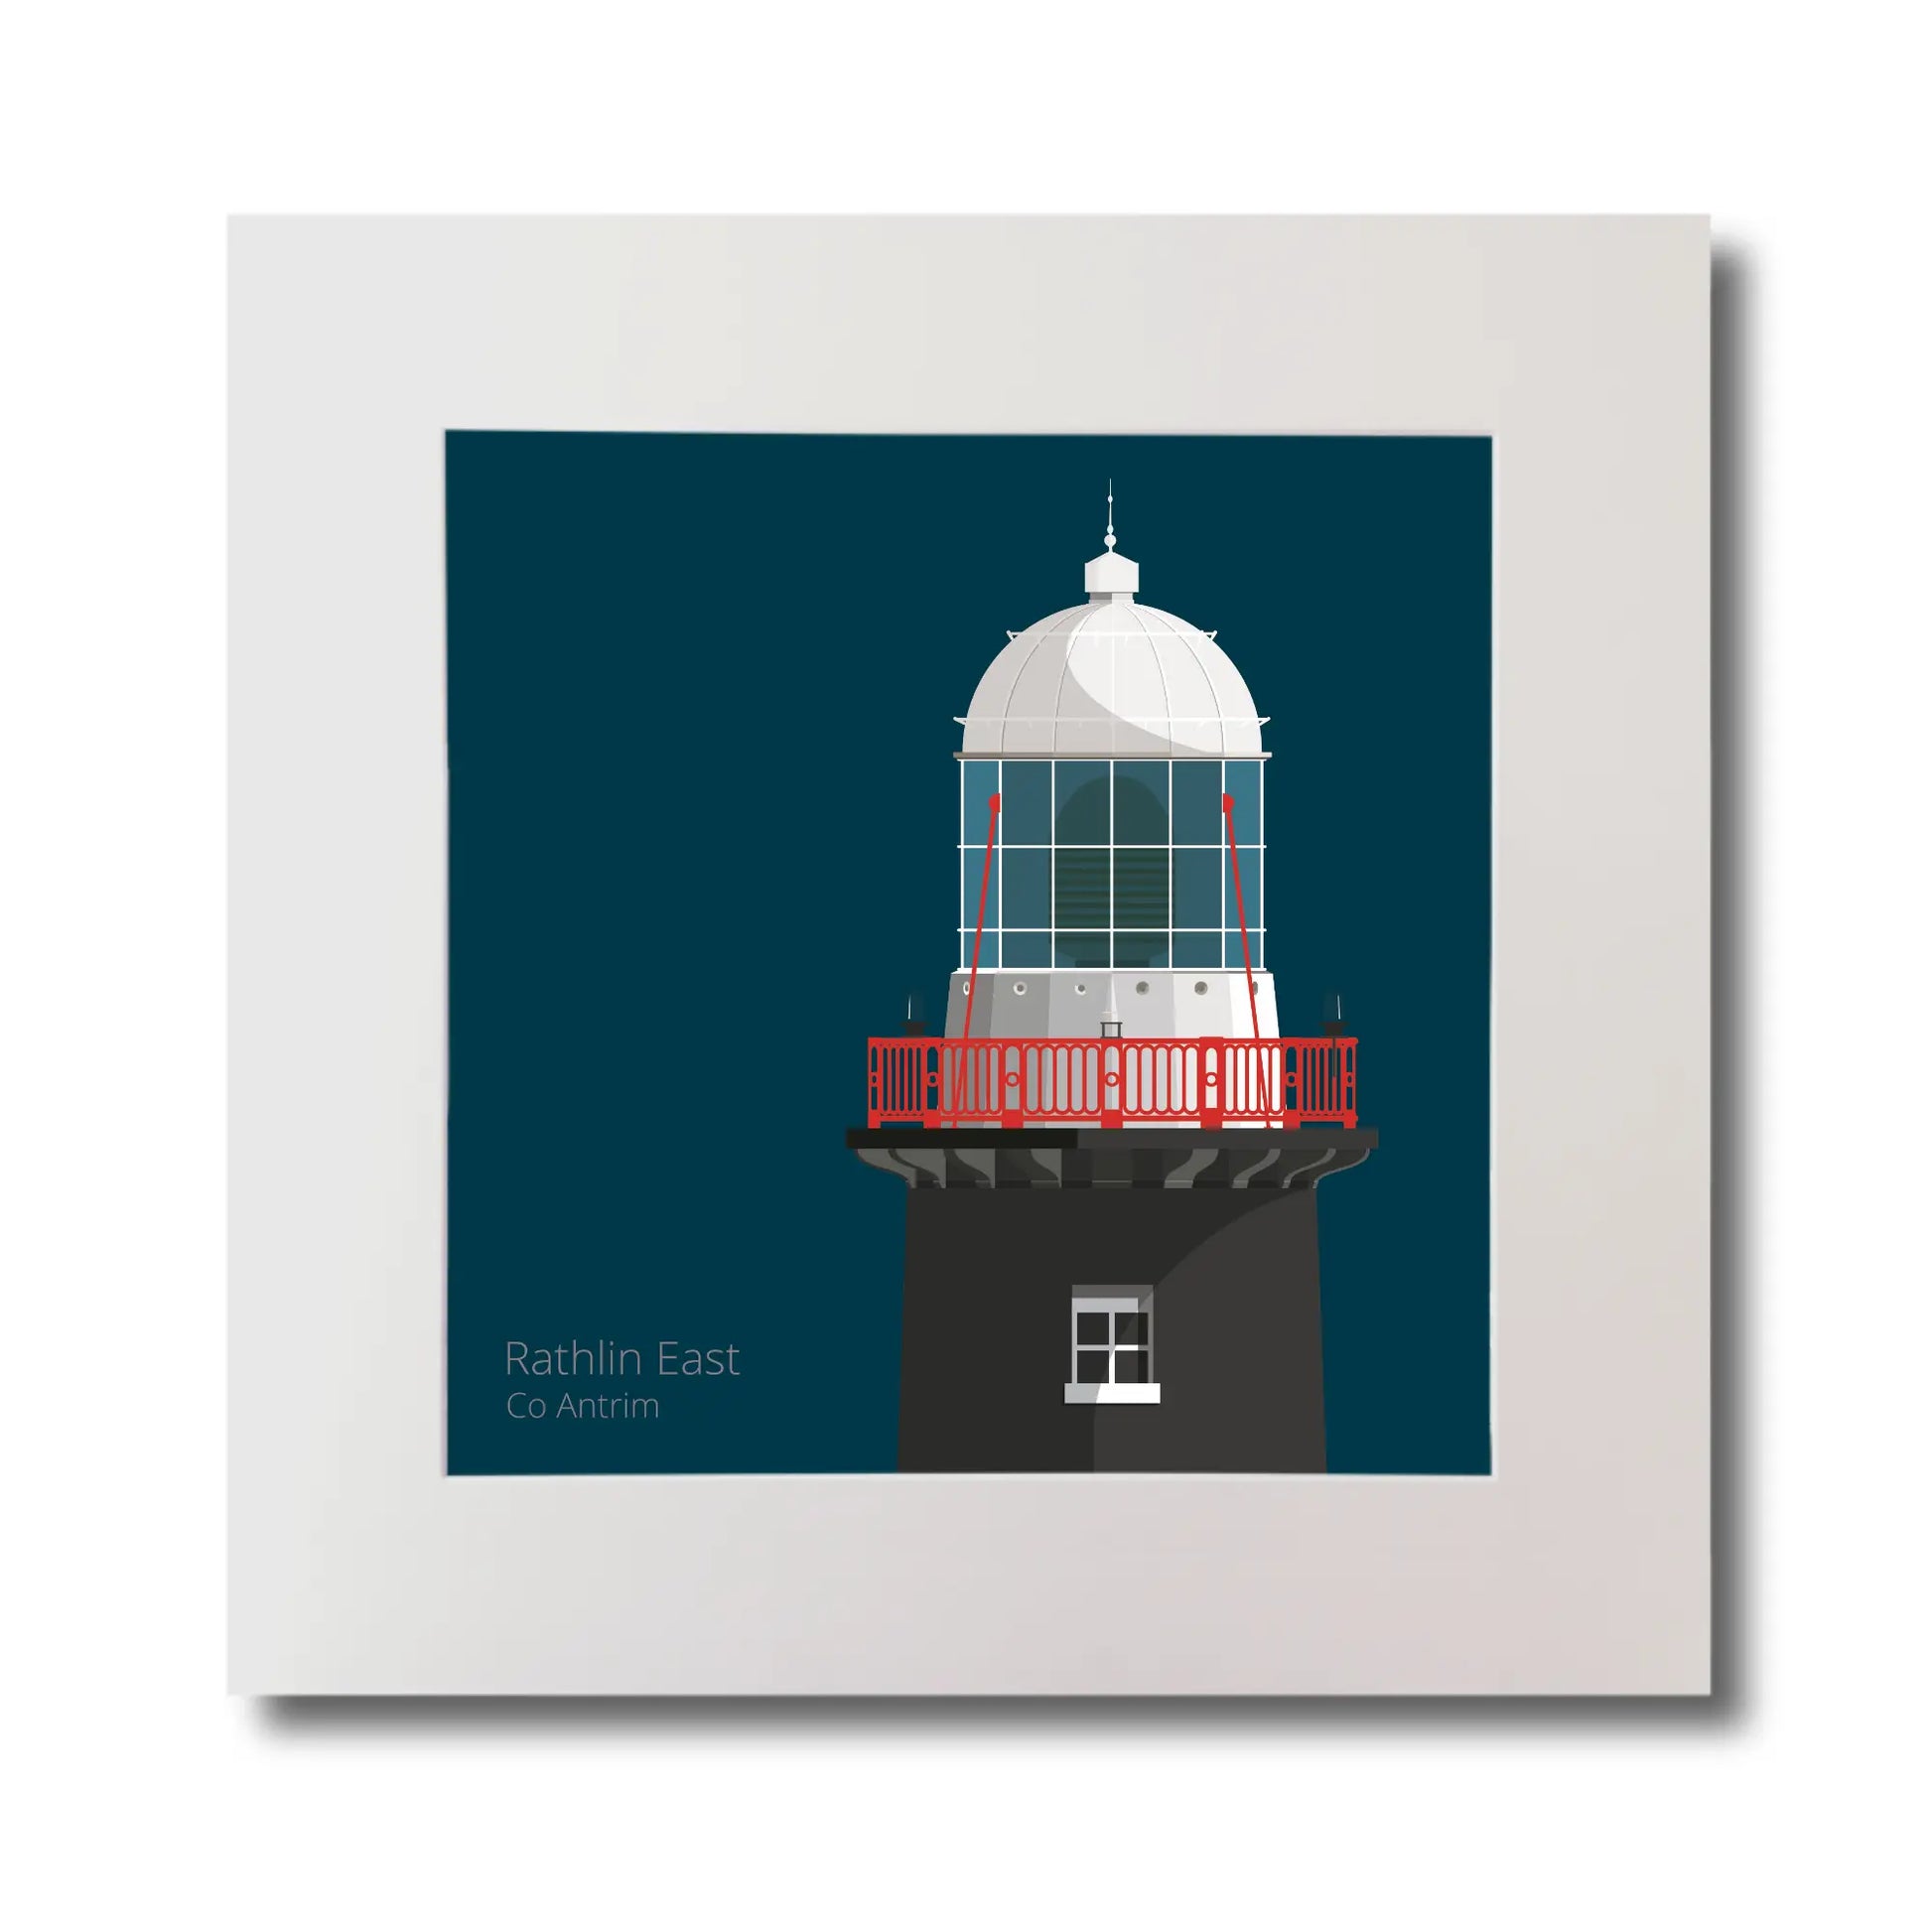 Illustration of Rathlin East lighthouse on a midnight blue background, mounted and measuring 30x30cm.